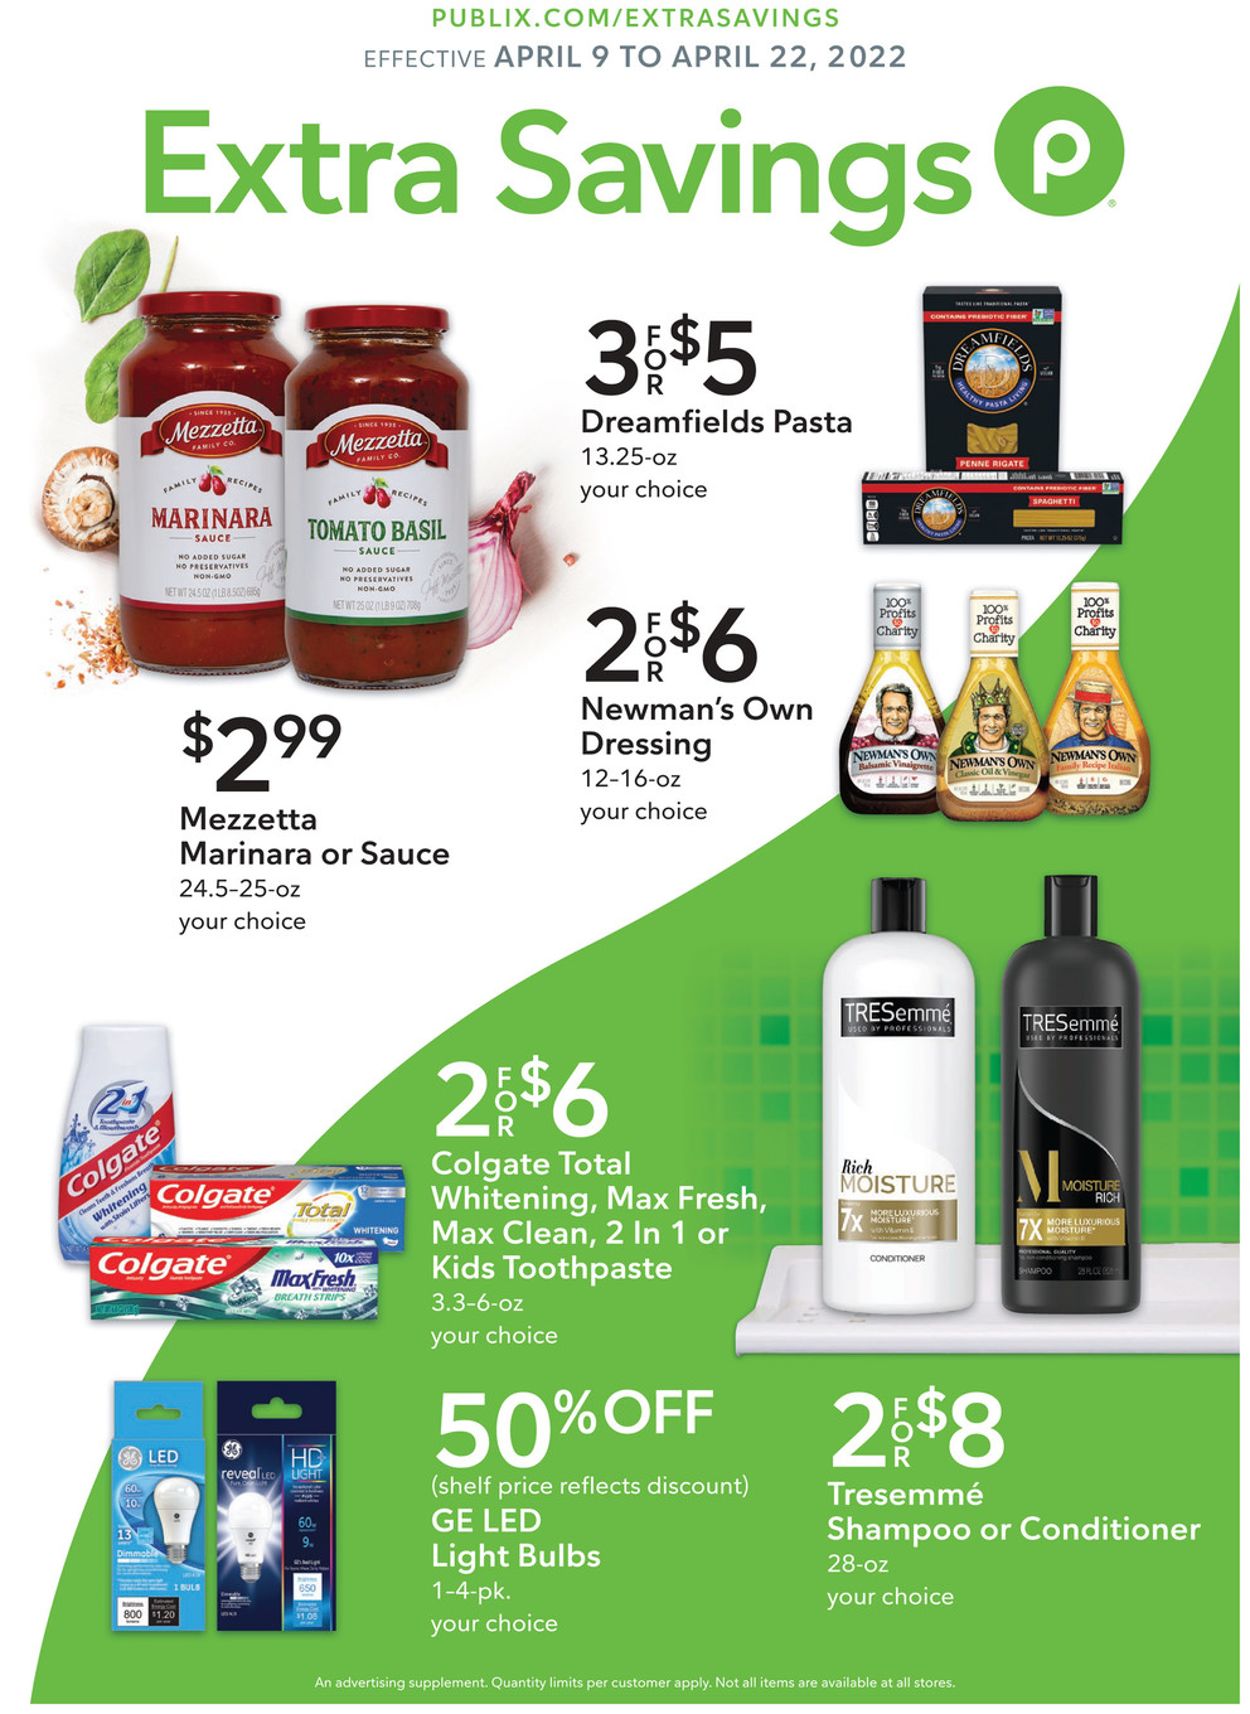 publix-current-weekly-ad-04-09-04-22-2022-frequent-ads